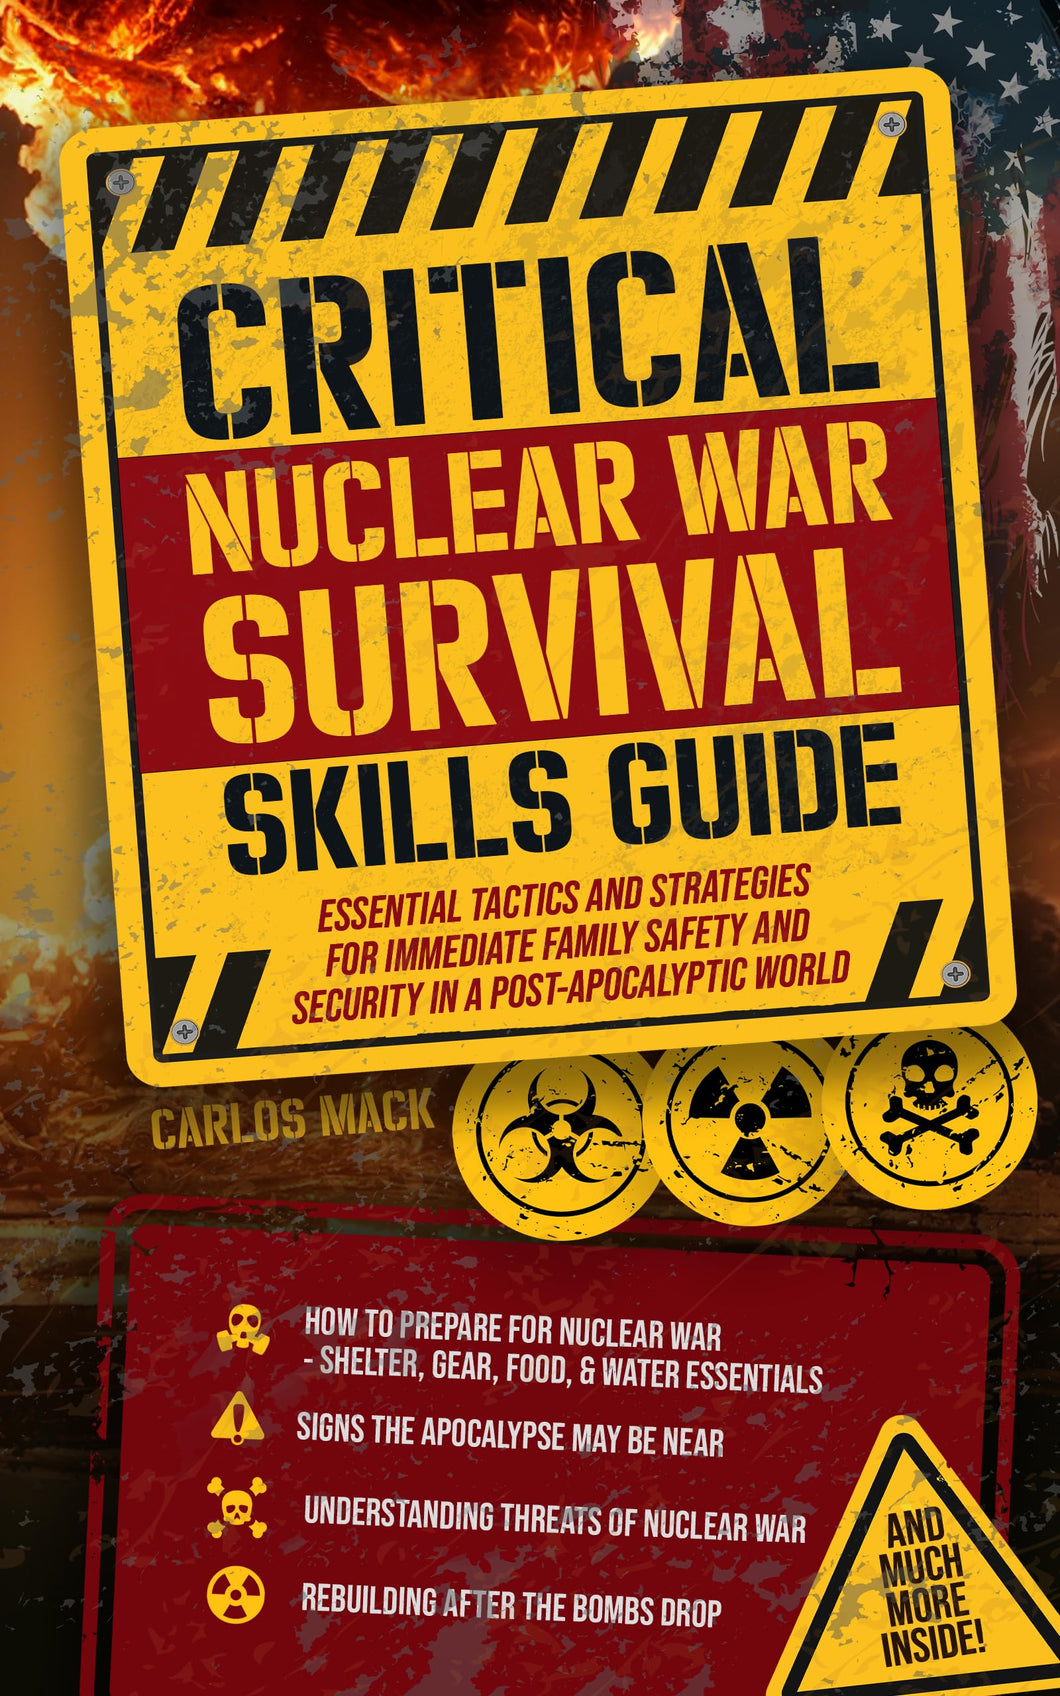 Critical Nuclear War Survival Skills Guide: Essential Tactics and Strategies for Immediate Family Safety and Security in a Post-Apocalyptic World